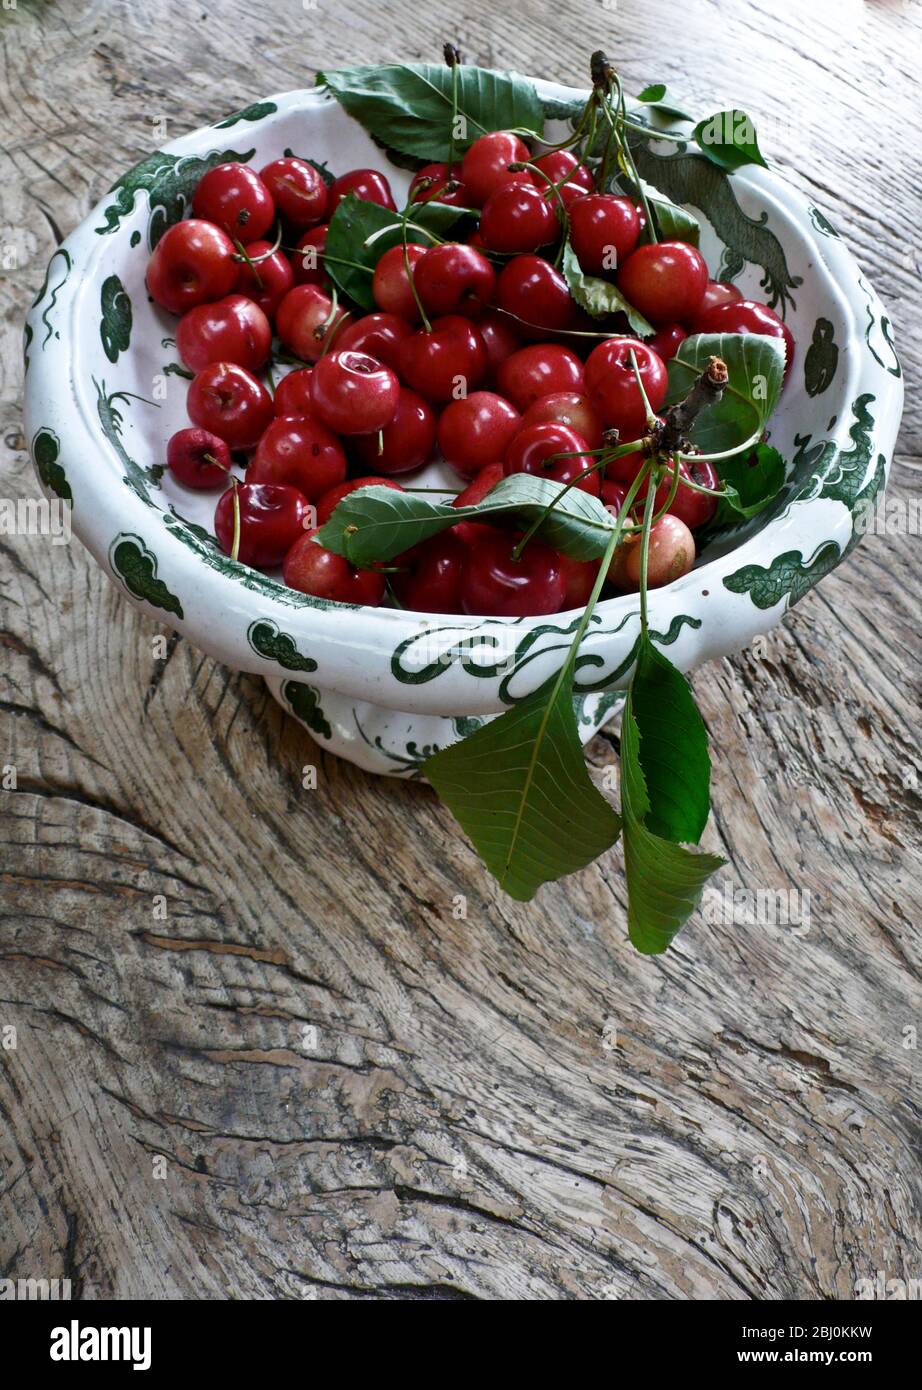 Freshly picked cherries from a Kentish garden in decorative pedestal bowl on rustic wood table - Stock Photo